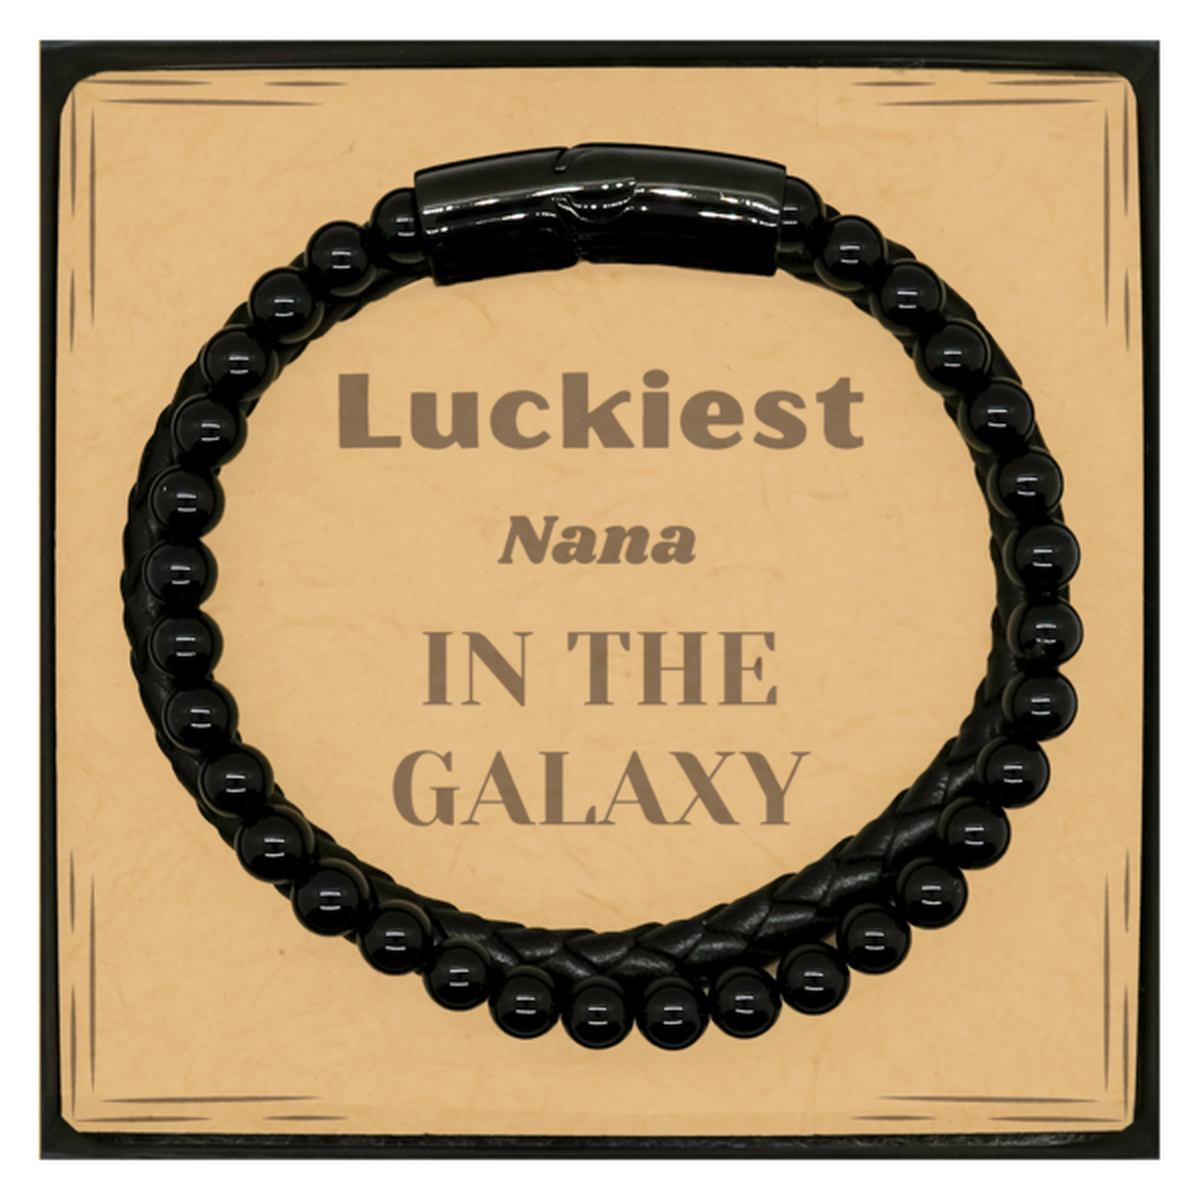 Luckiest Nana in the Galaxy, To My Nana Message Card Gifts, Christmas Nana Stone Leather Bracelets Gifts, X-mas Birthday Unique Gifts For Nana Men Women